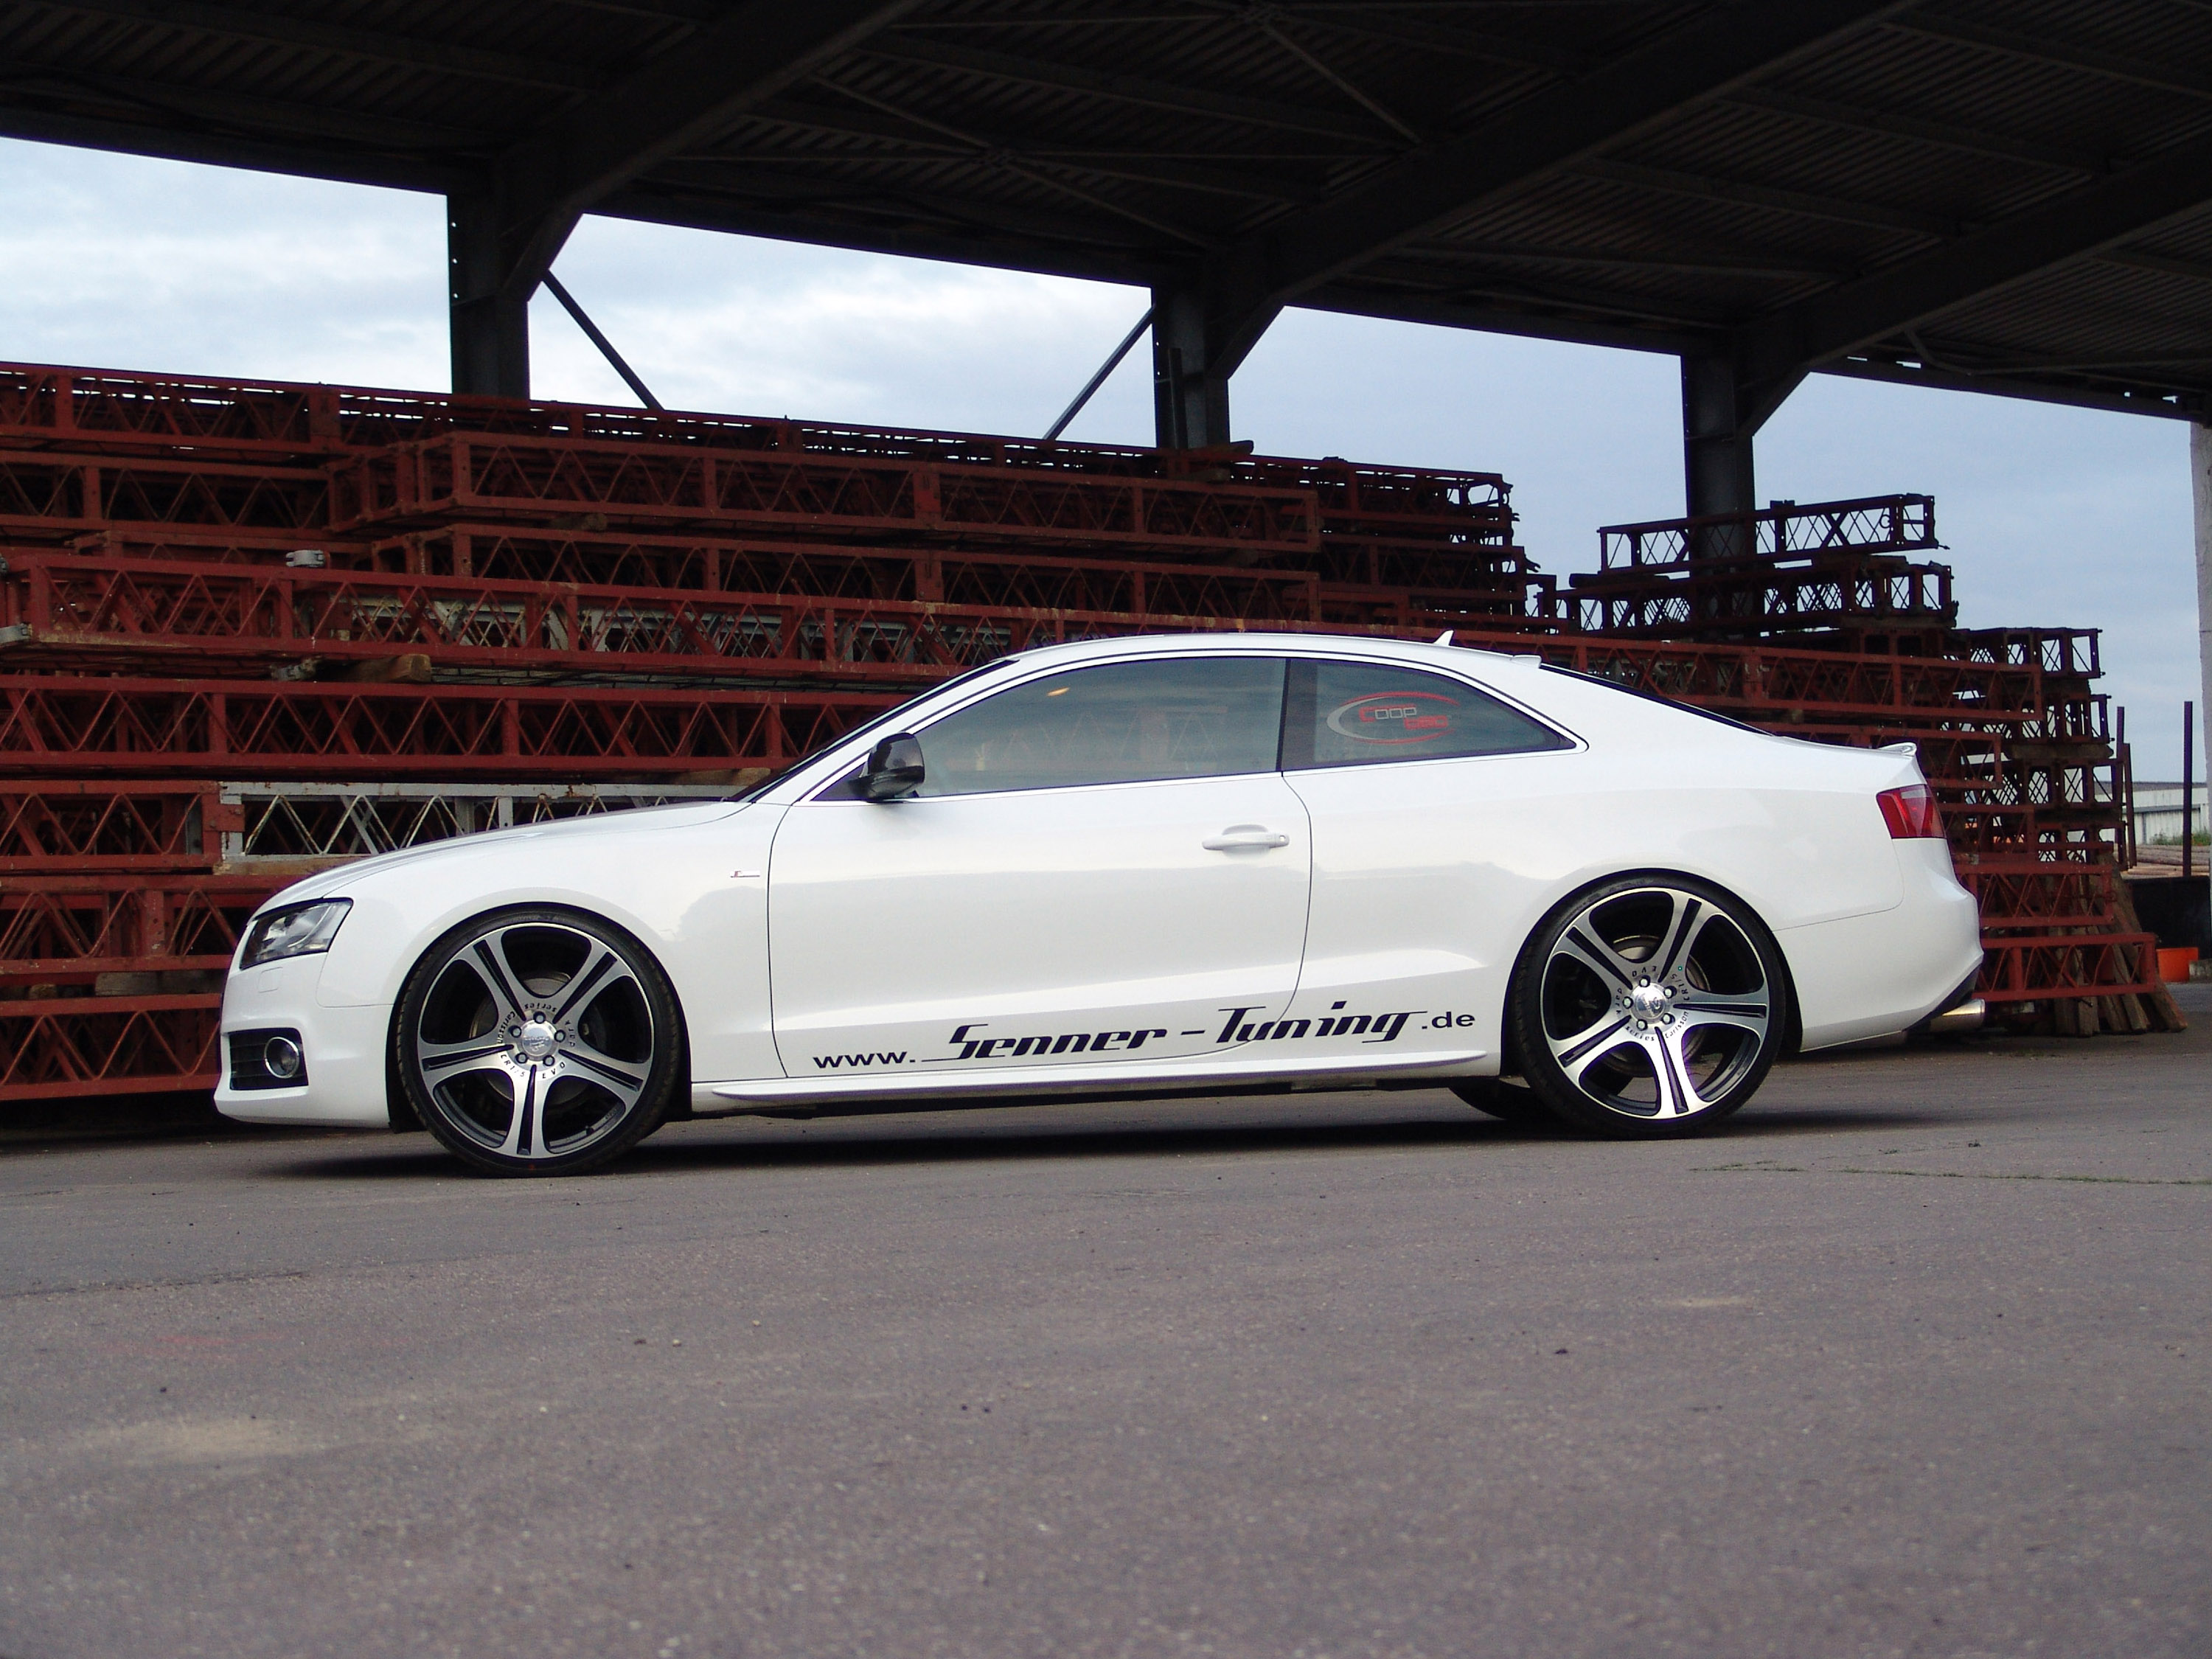 Senner Audi A5 with Carlsson Evo DS alloy wheels